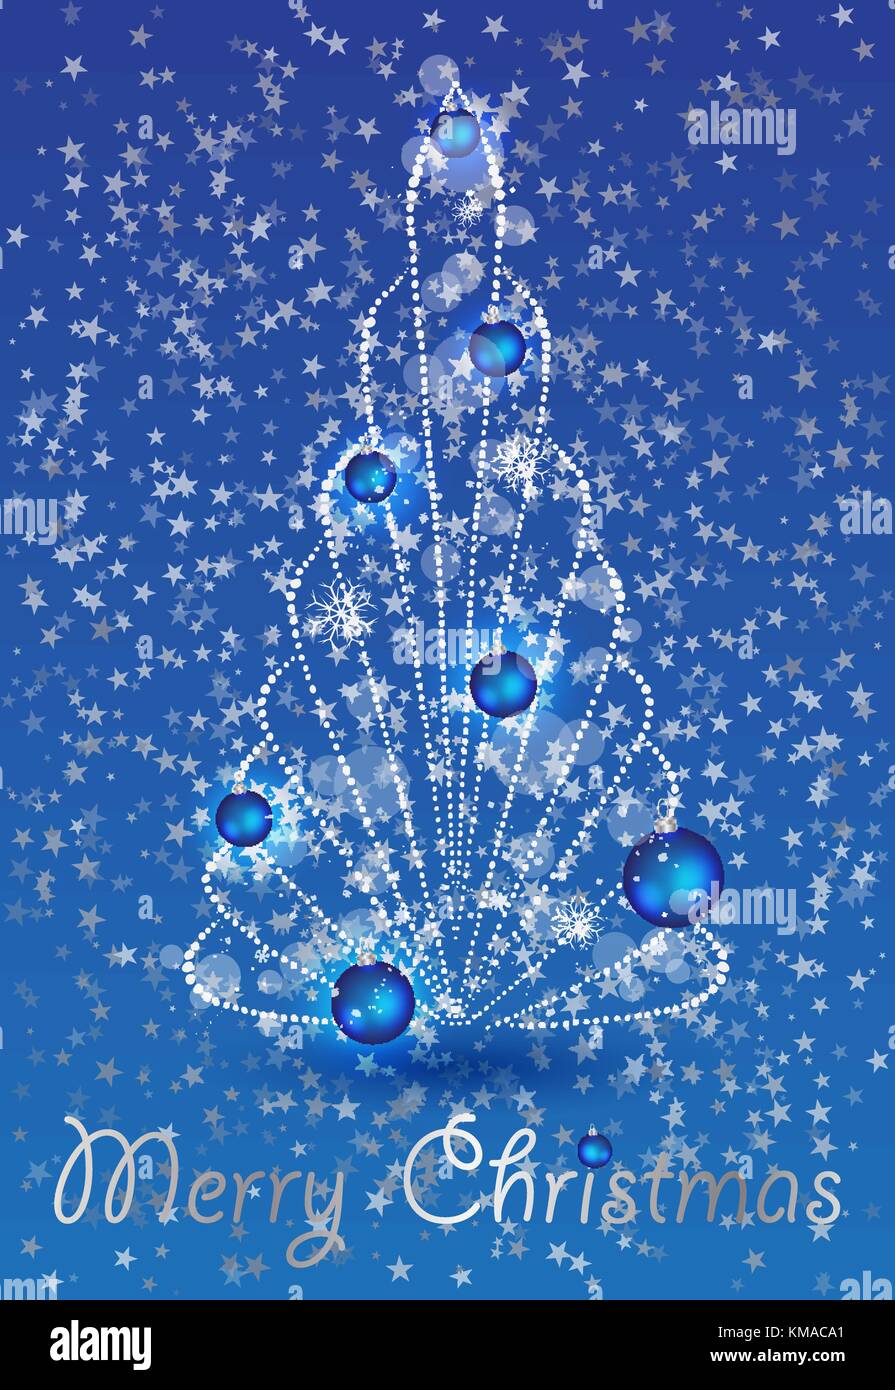 Decorated christmas tree with star, lights, decoration balls and lamps. Merry Christmas and a happy new year. Stock Vector